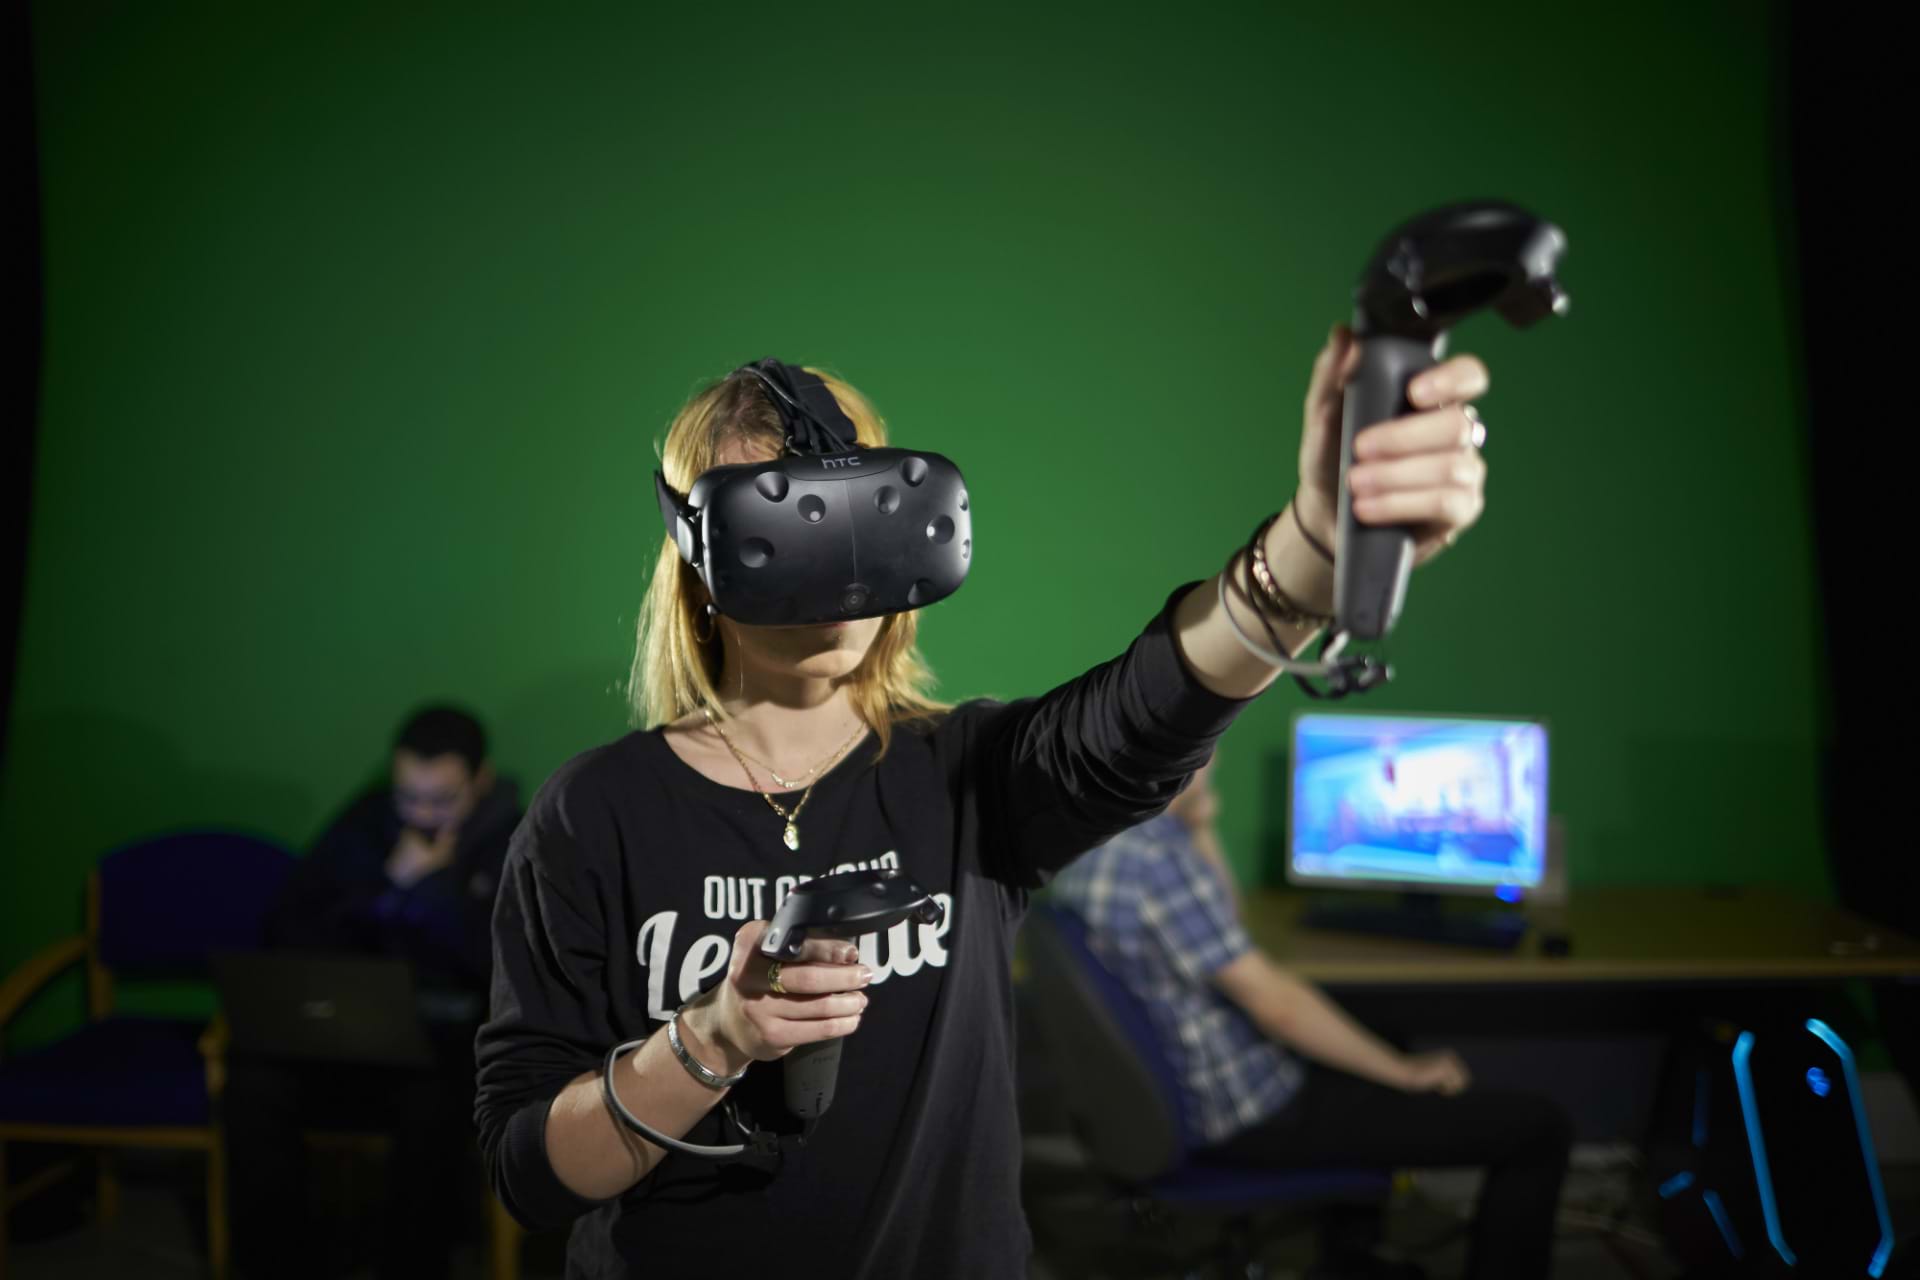 A student using VR tech